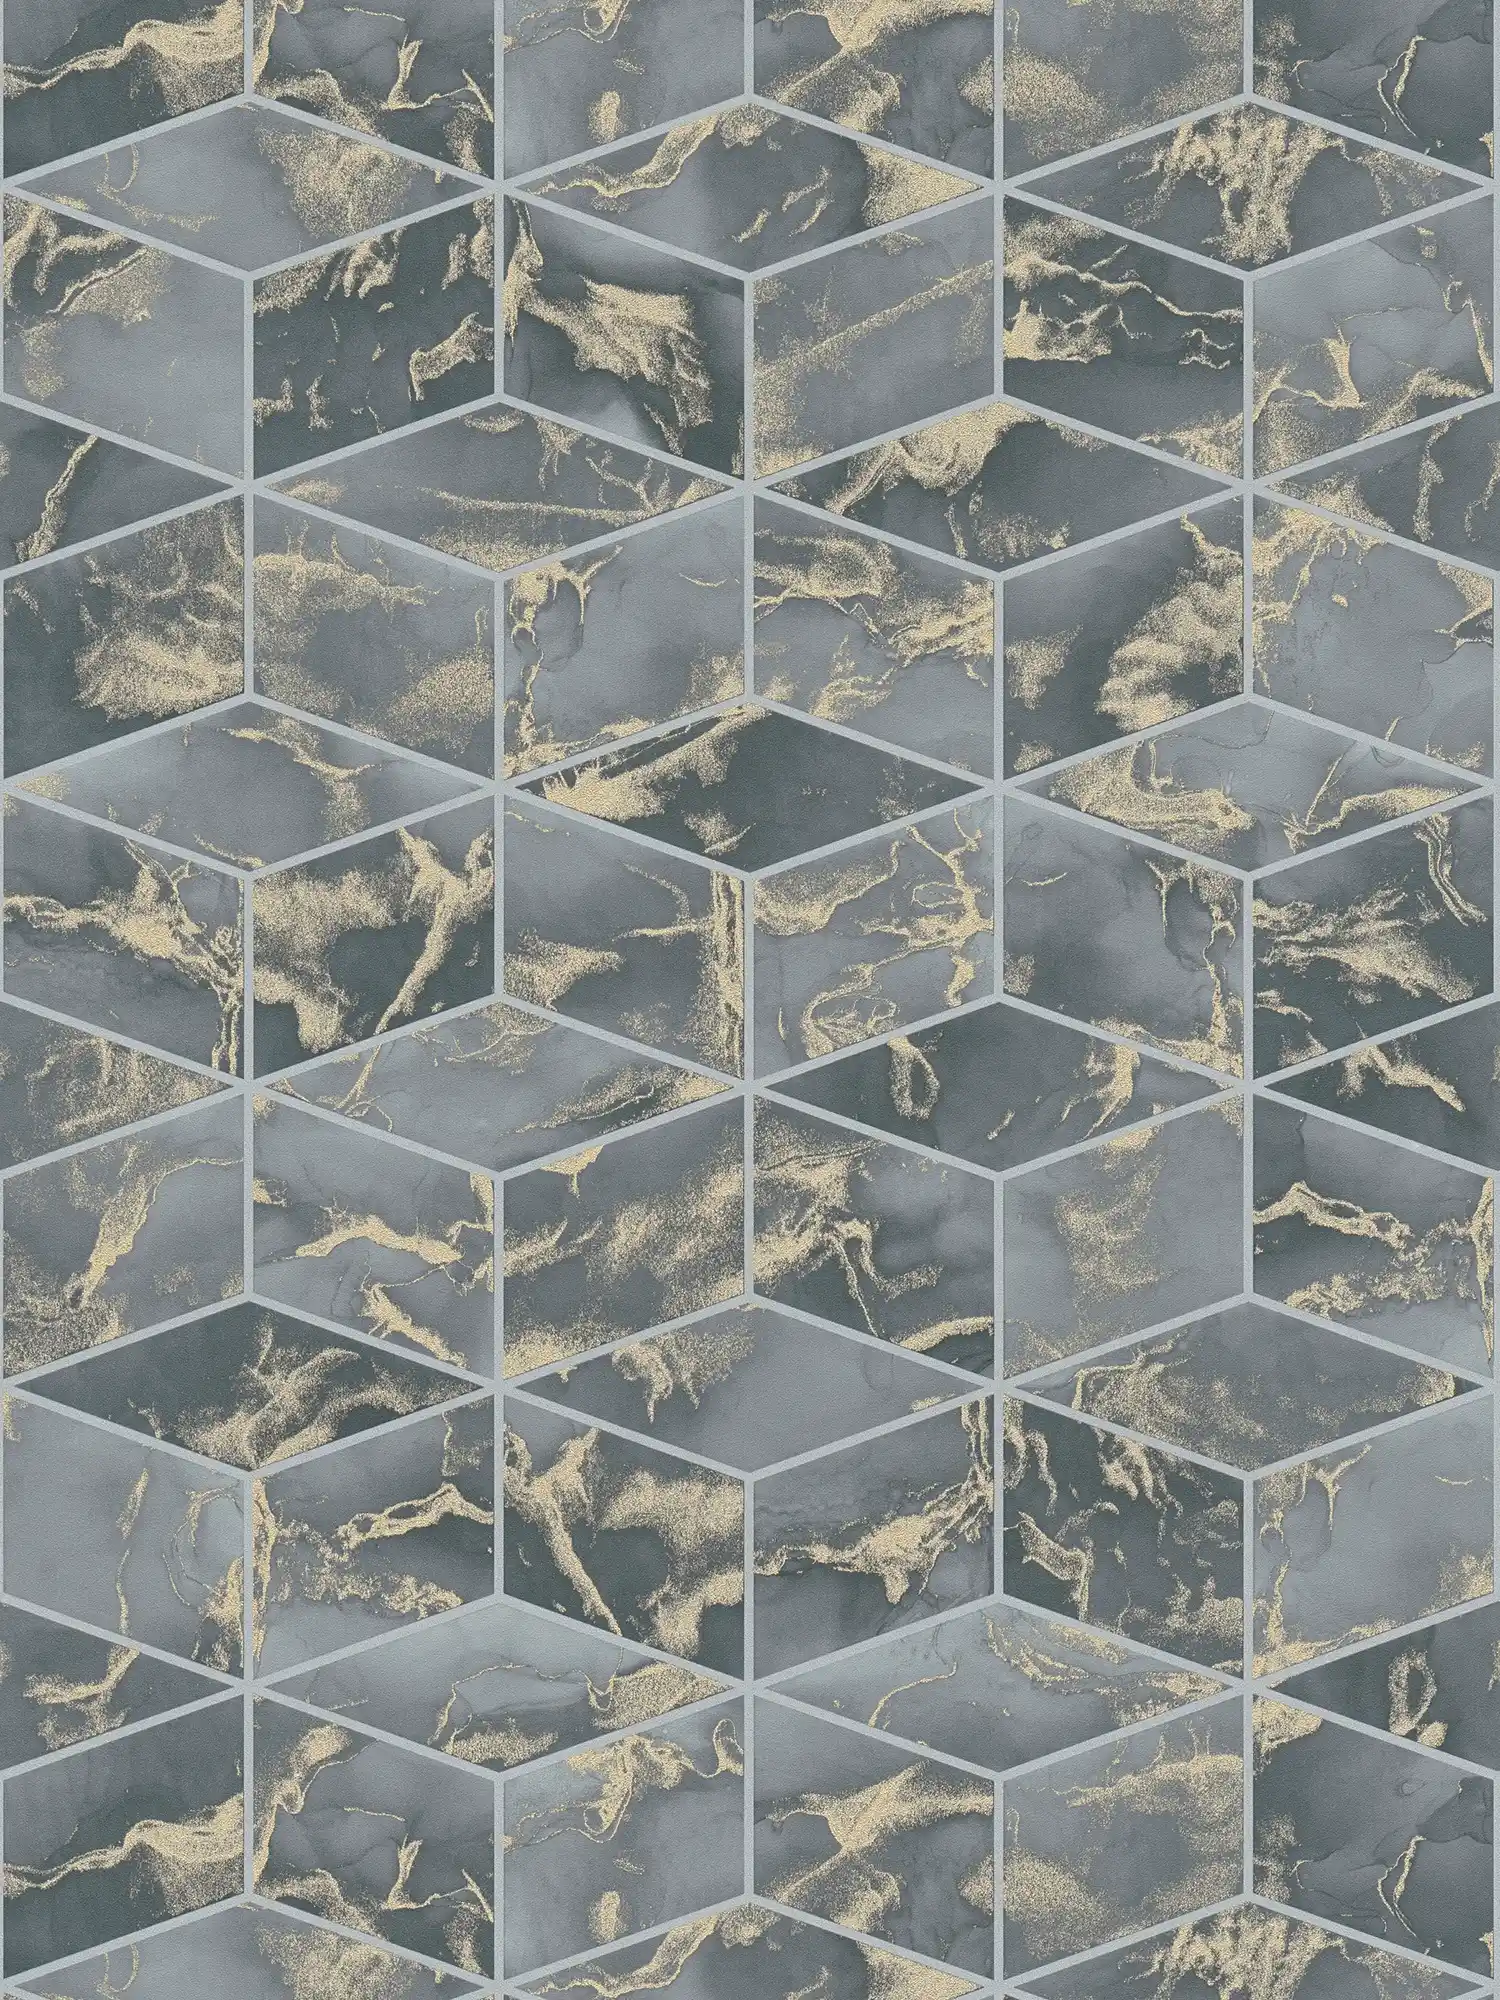 Marble wallpaper tile look with gold accent - grey, green, metallic
